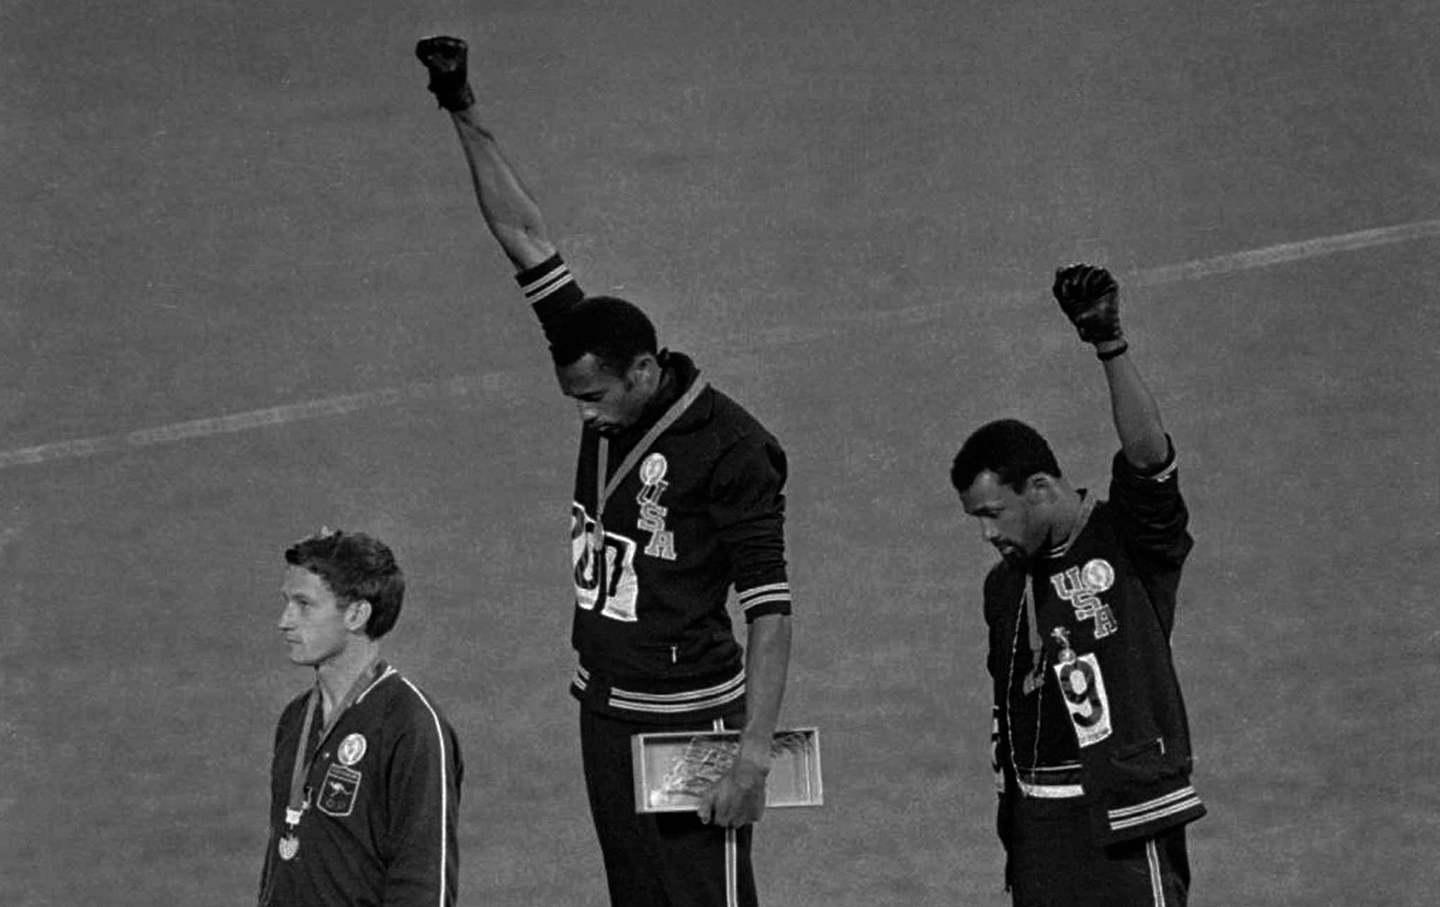 John Carlos and Tommie Smith at the 1968 Olympics